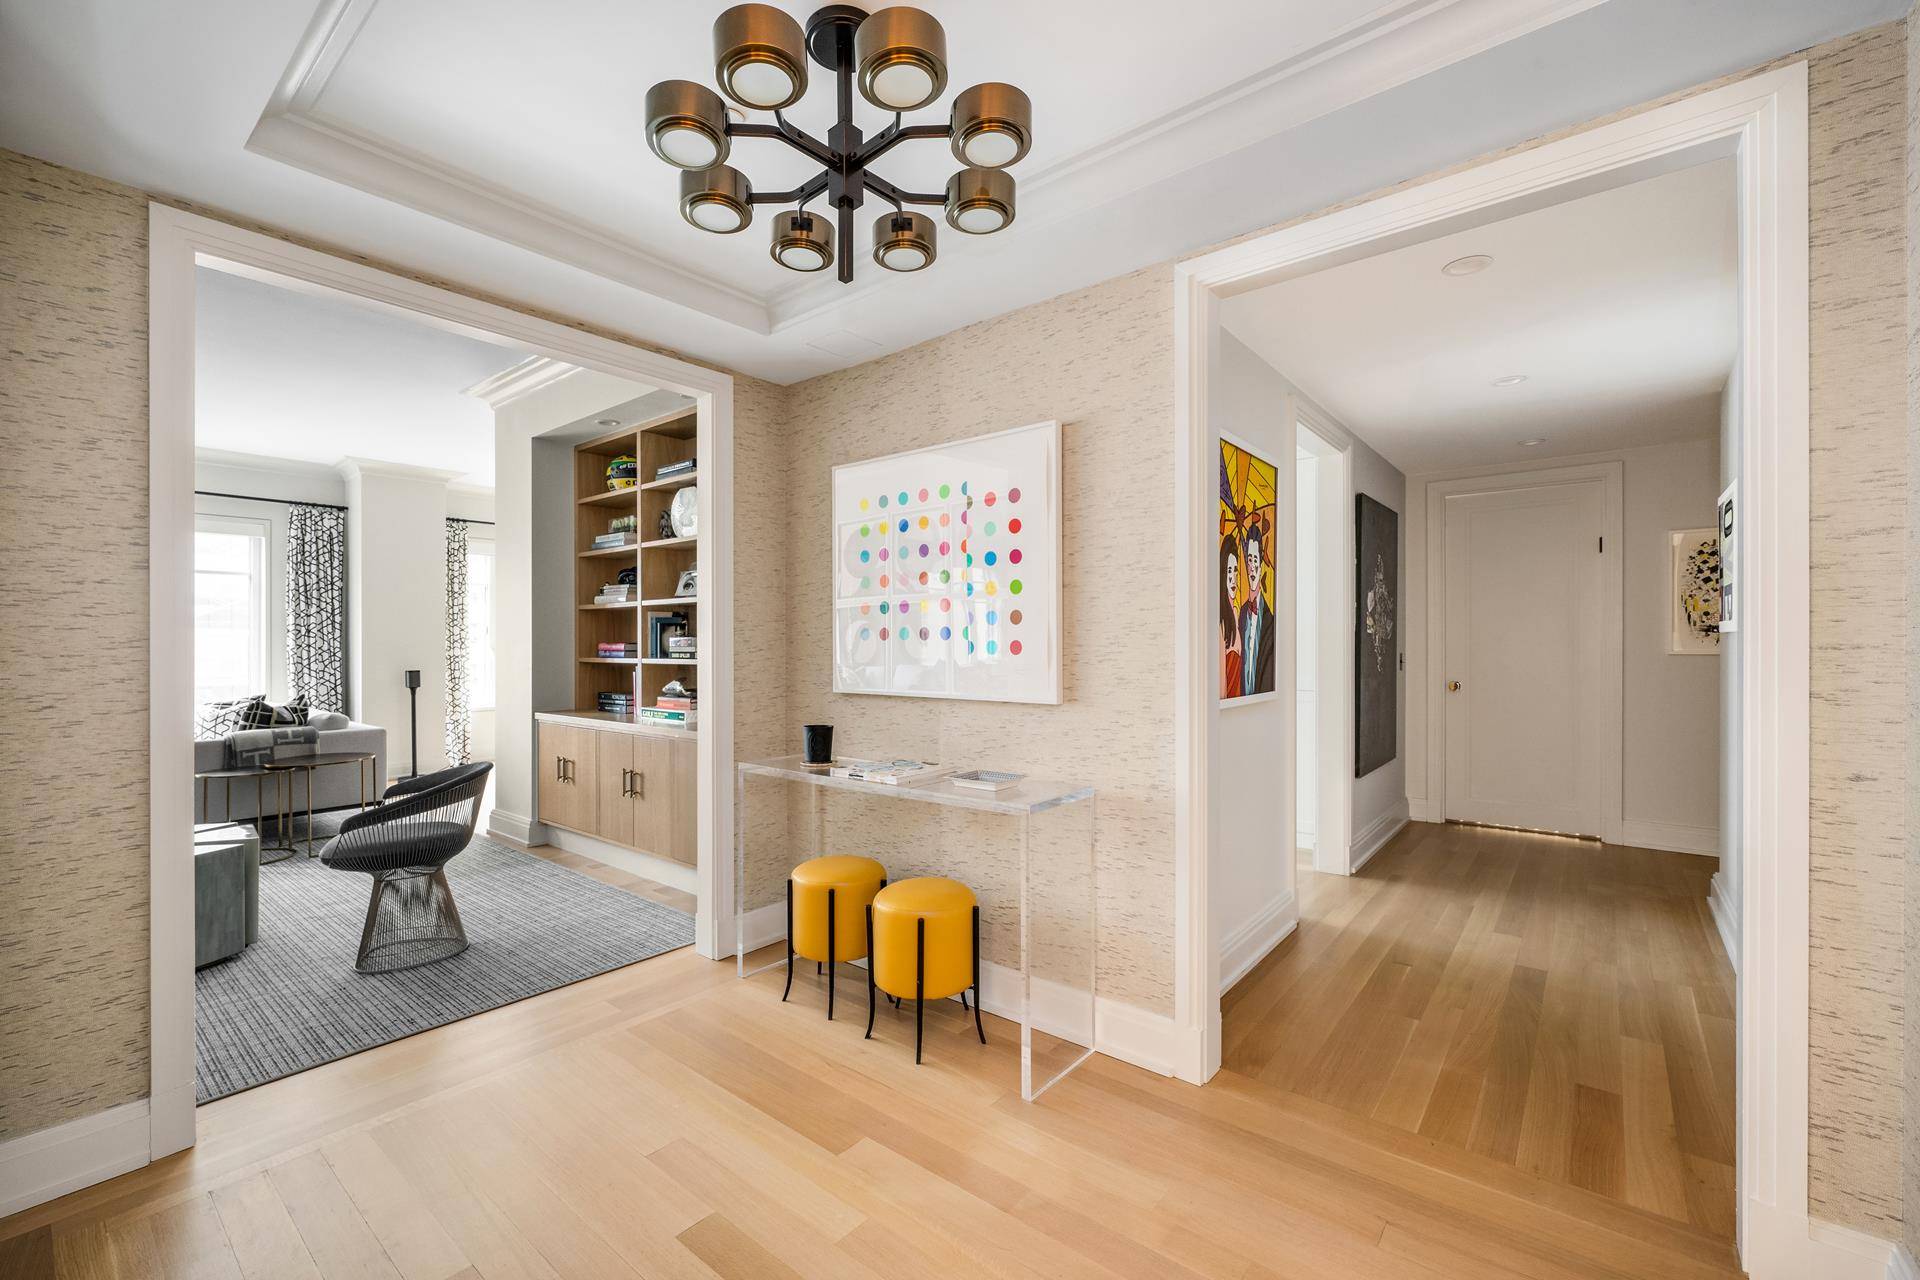 Triple mint and exquisitely renovated apartment in one of the Upper East Side's most sought after Condominium buildings.